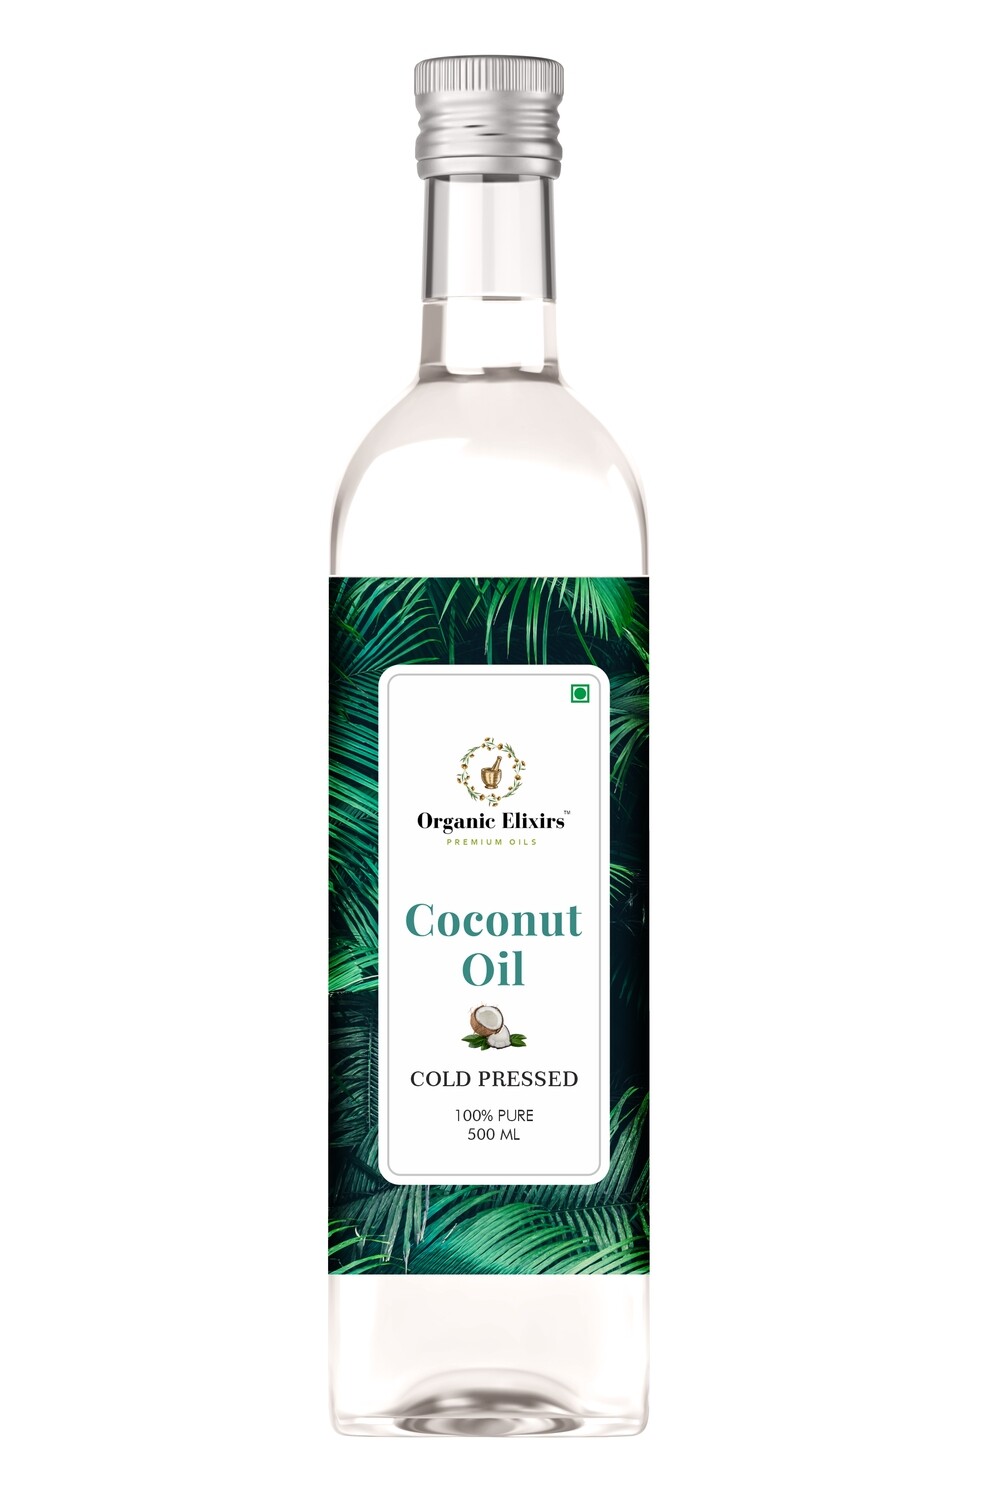 Organic Elixirs Cold pressed Coconut Oil 500 ML